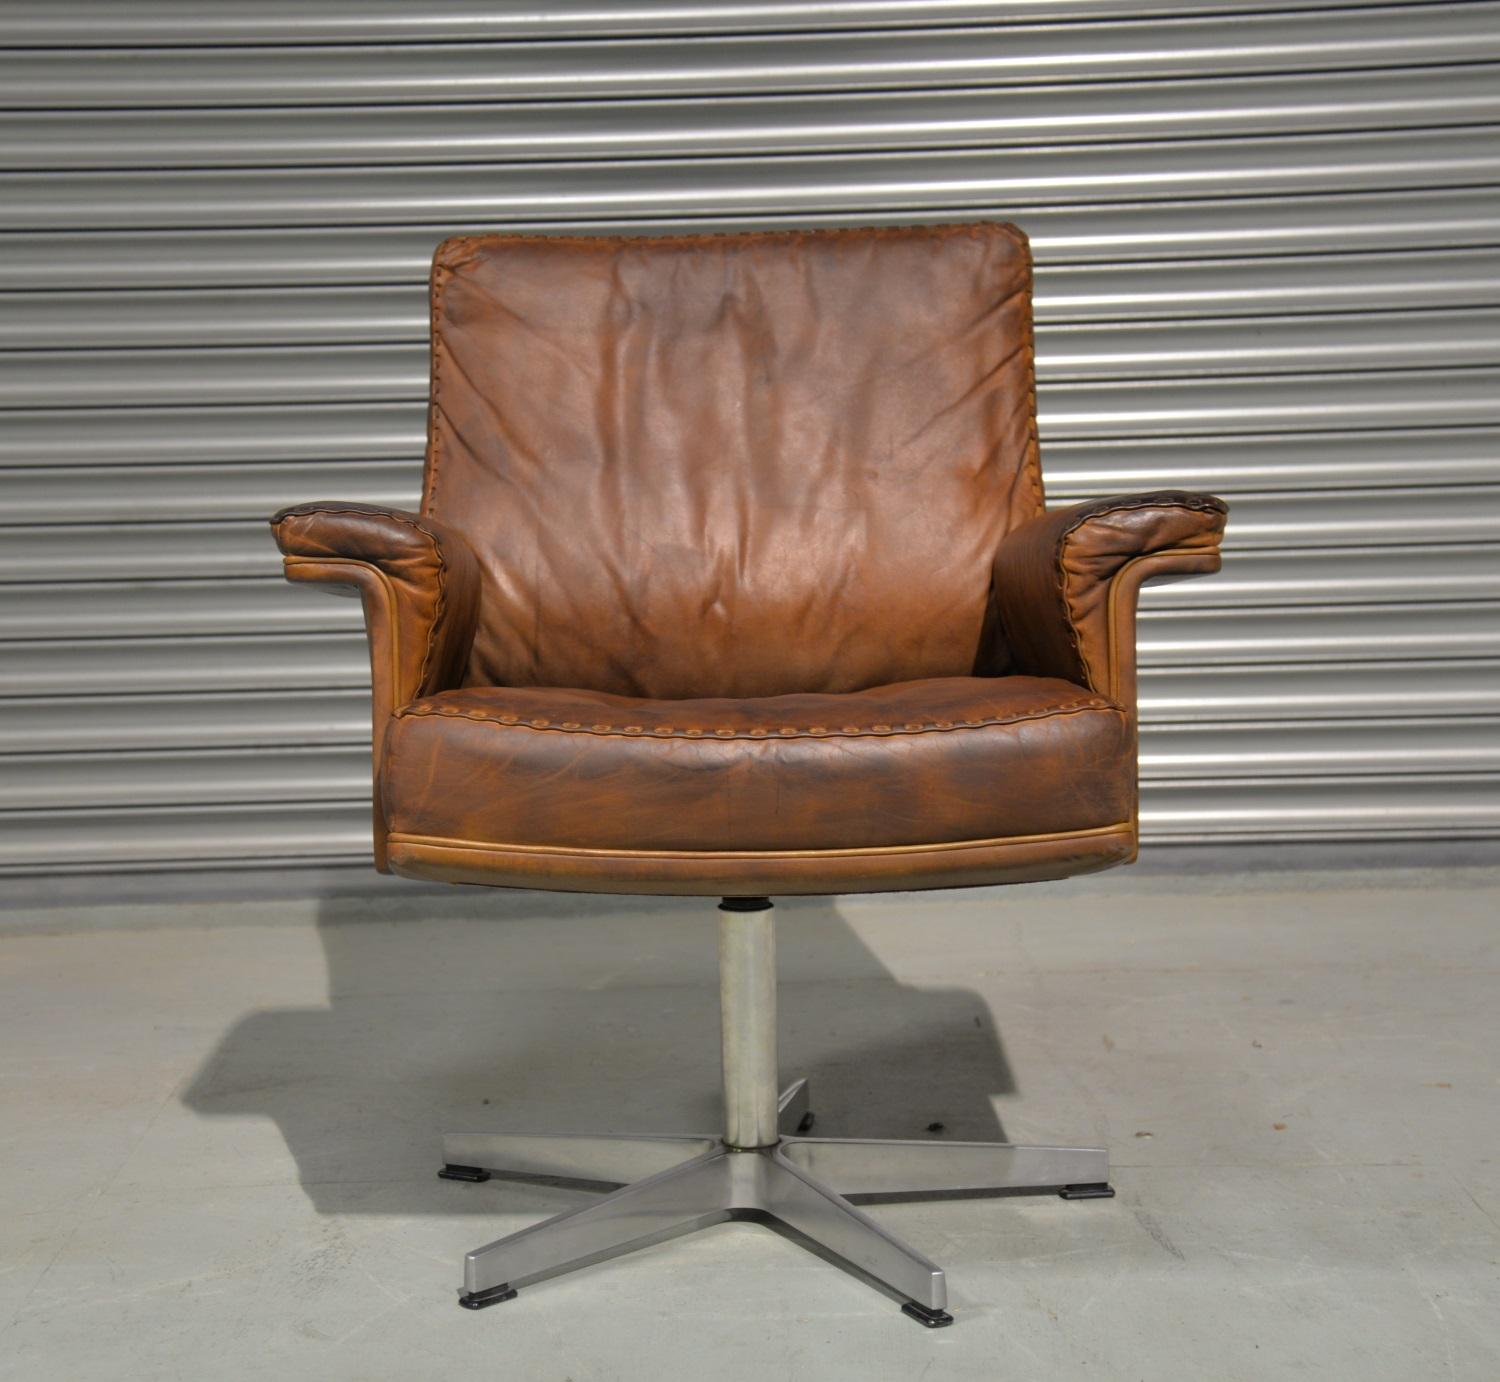 Discounted airfreight for our International and US customers ( from 2 weeks door to door )

We are delighted to bring to you an extremely rare vintage De Sede DS 35 executive swivel armchair. Hand built in the 1960`s to incredibly high standards by